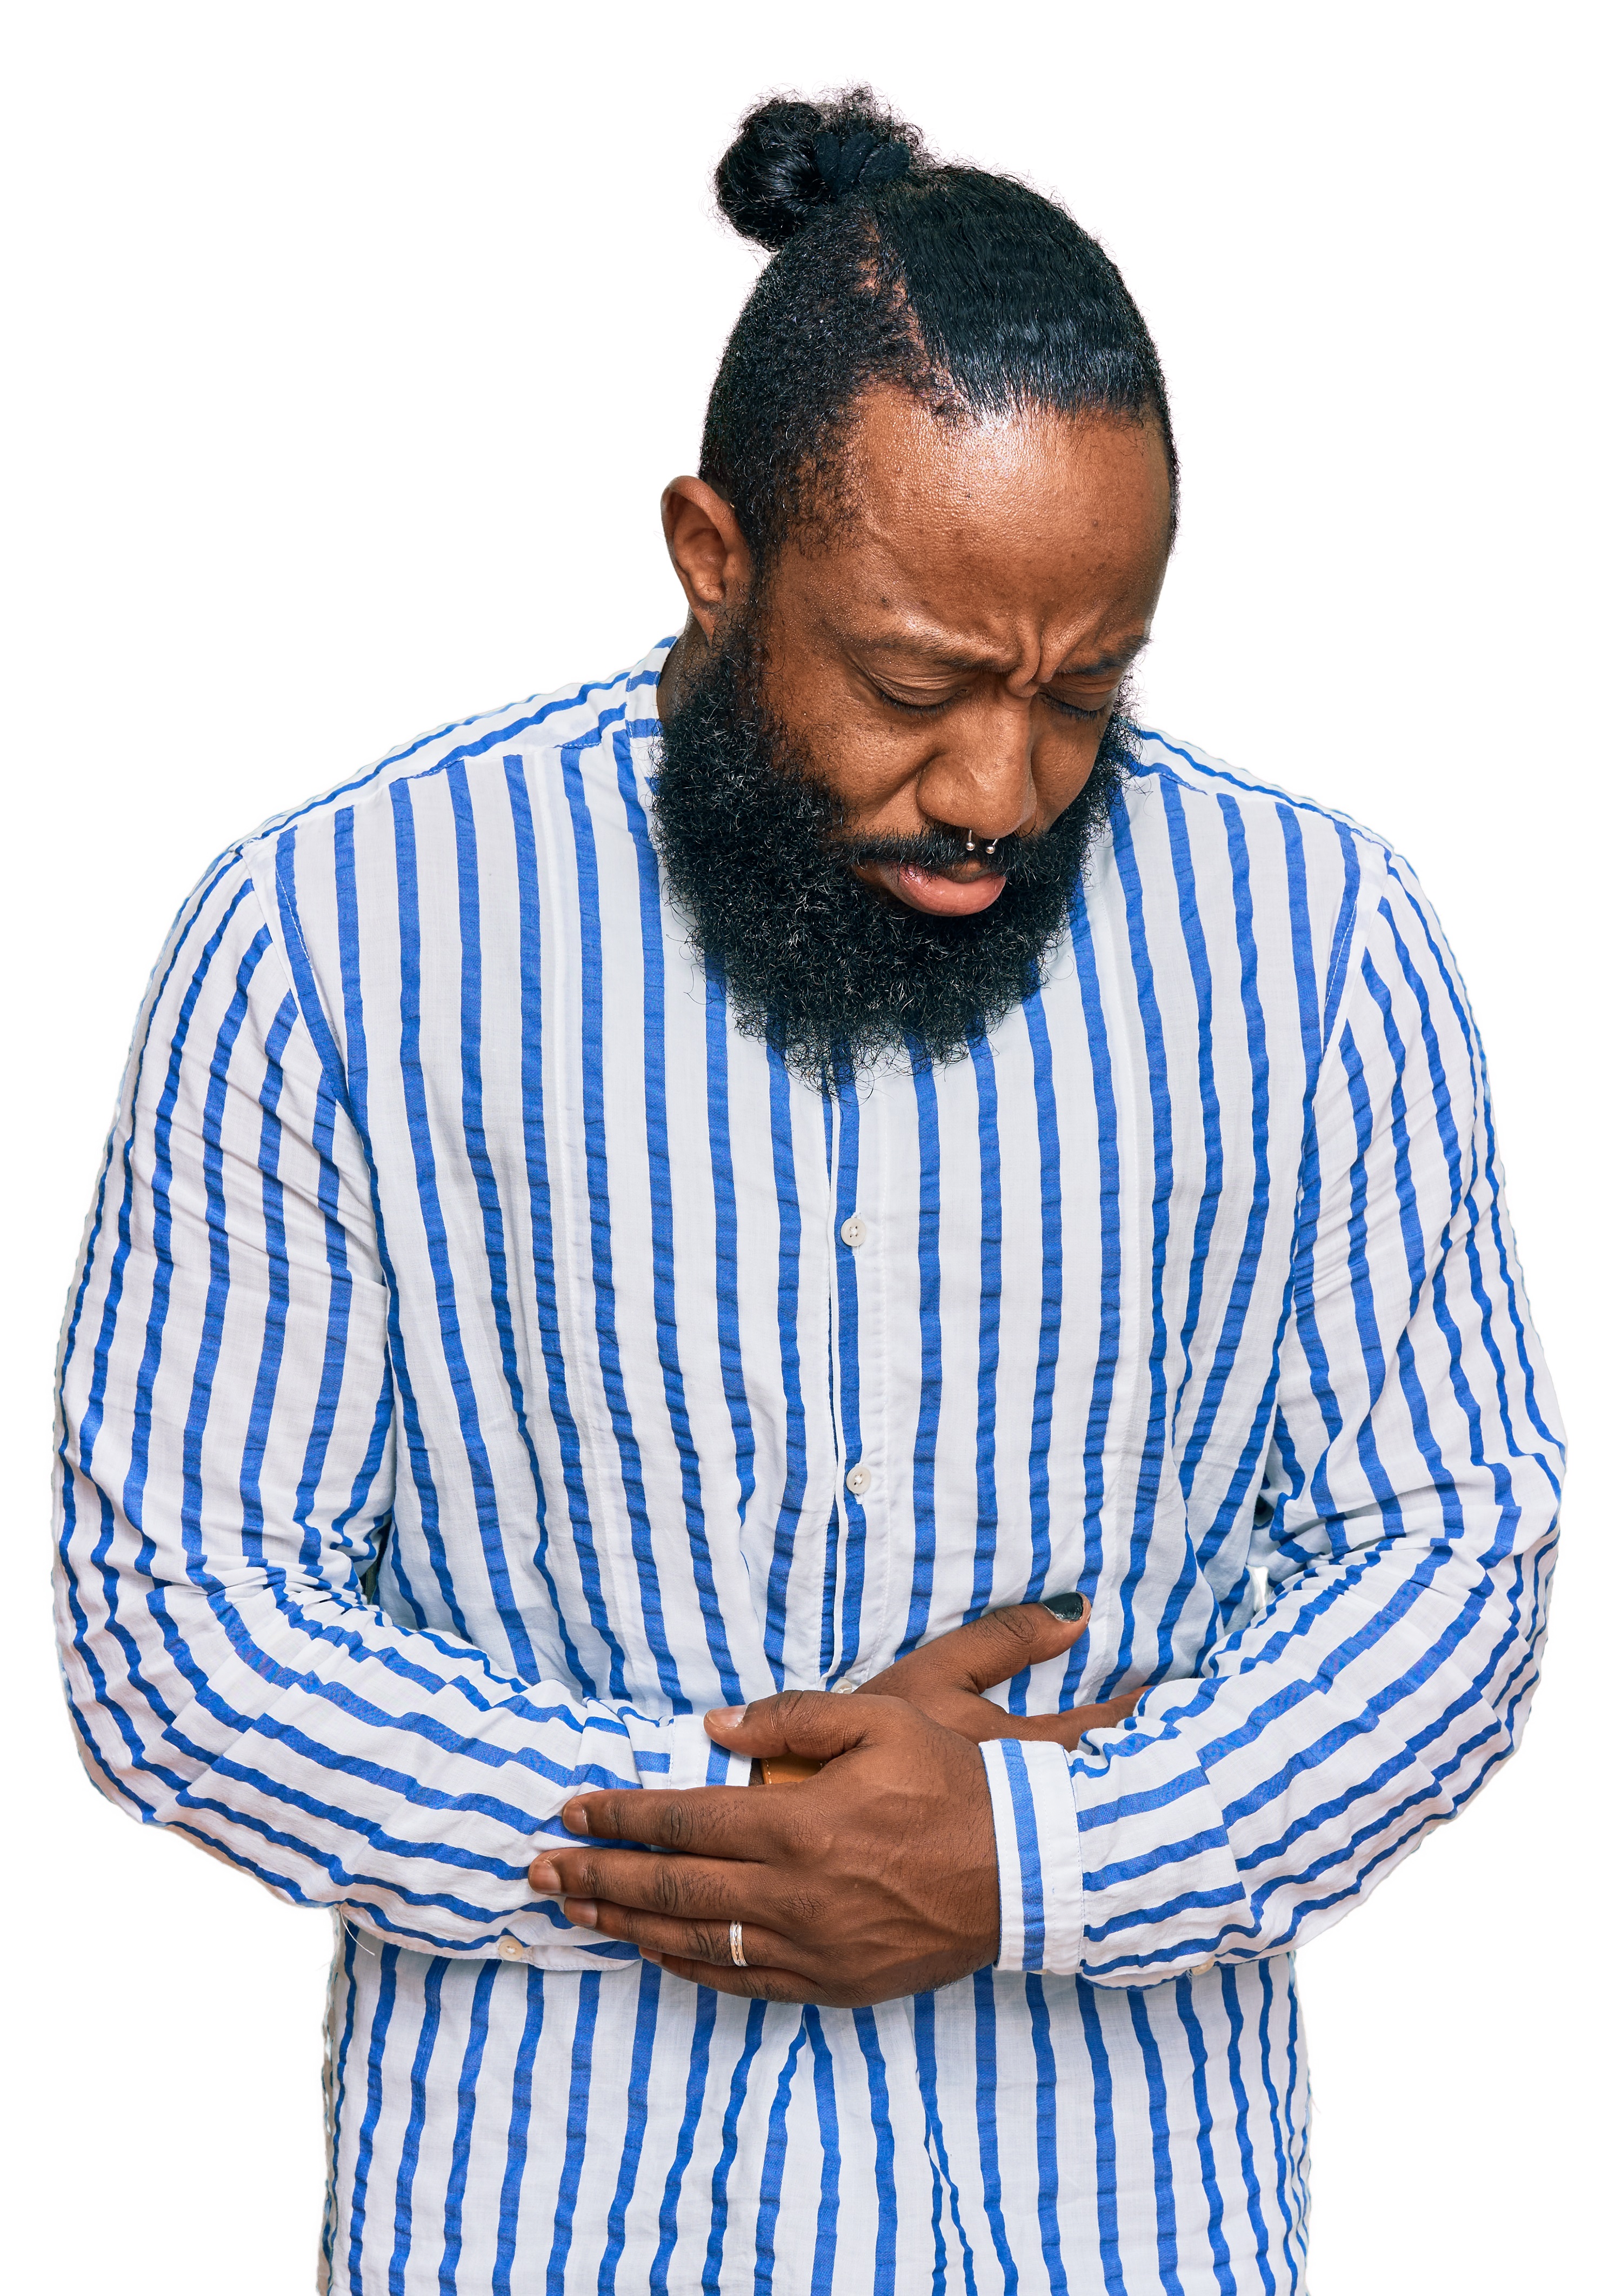 A young black man in business shirt holding tummy in apparent show of tummy ache